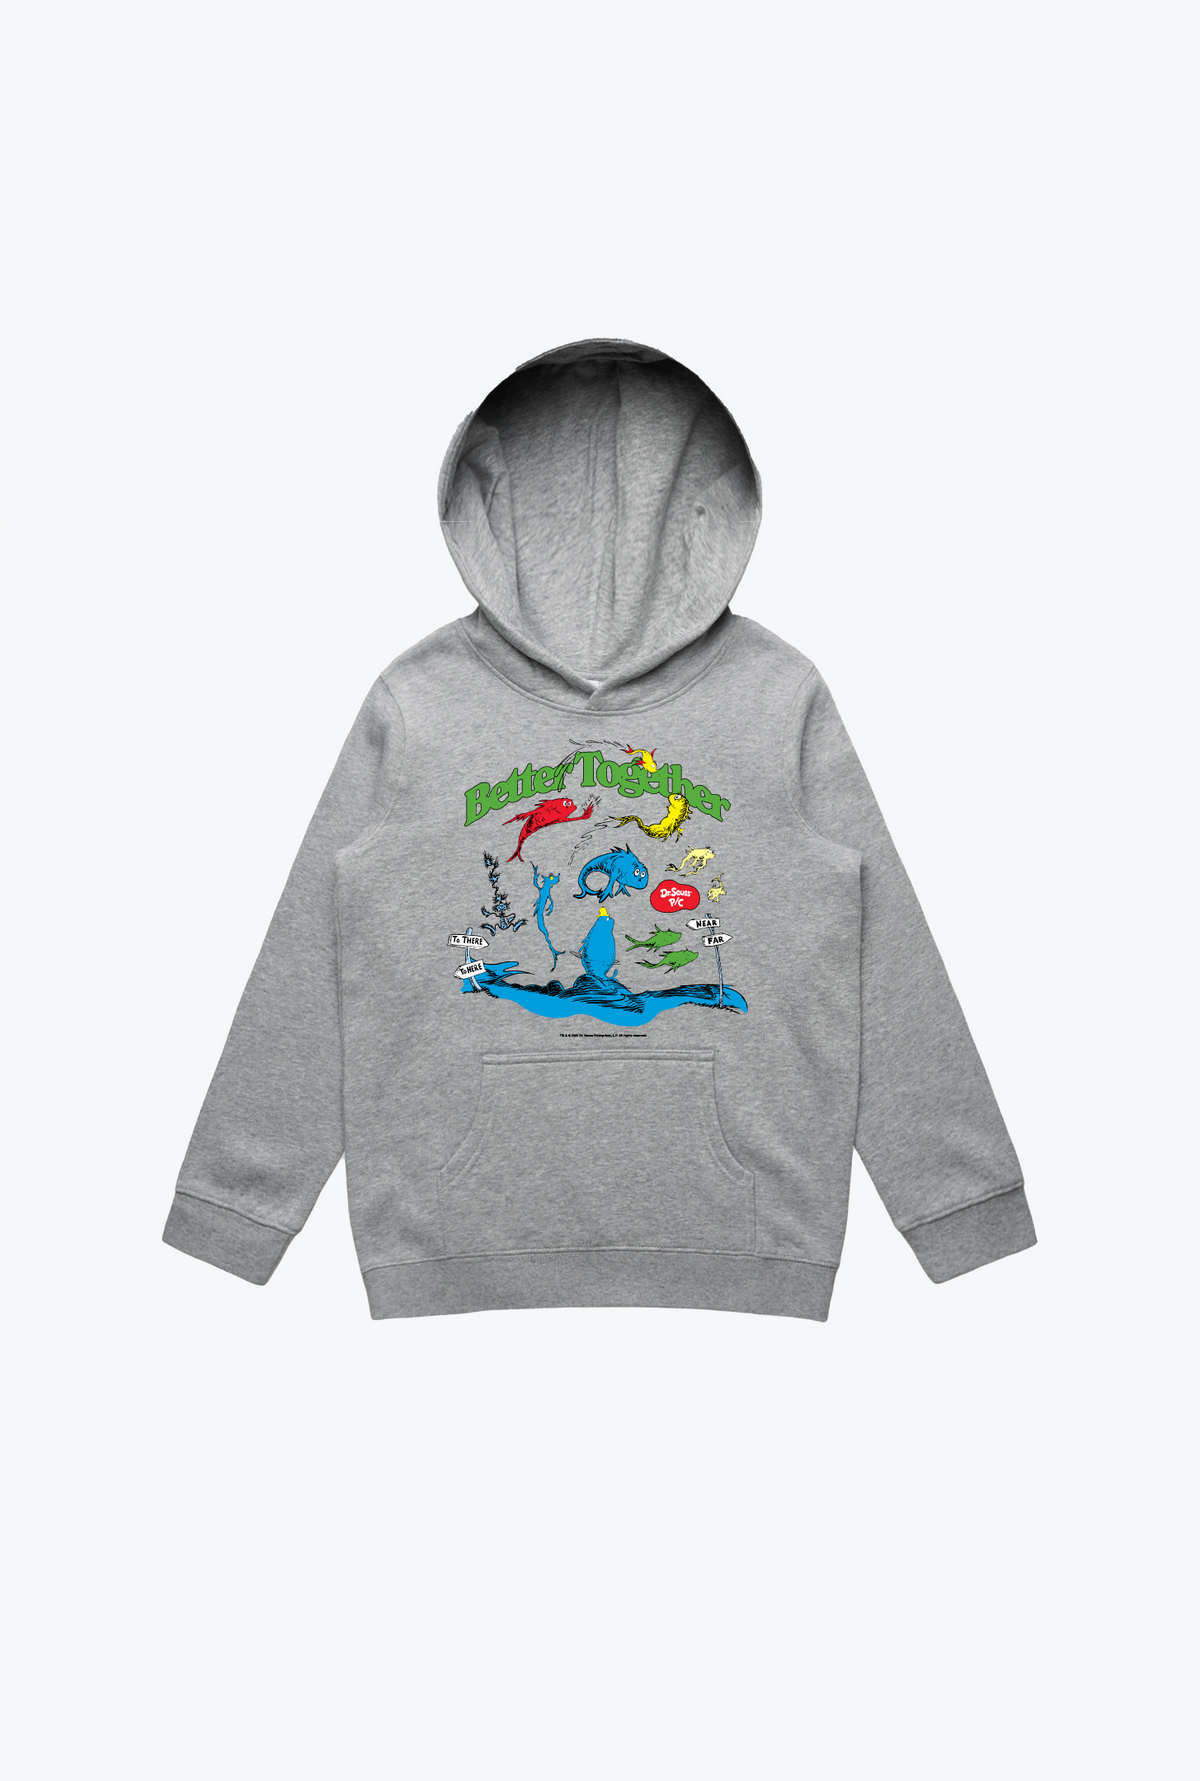 One Fish Two Fish Better Together Youth Crewneck - Grey